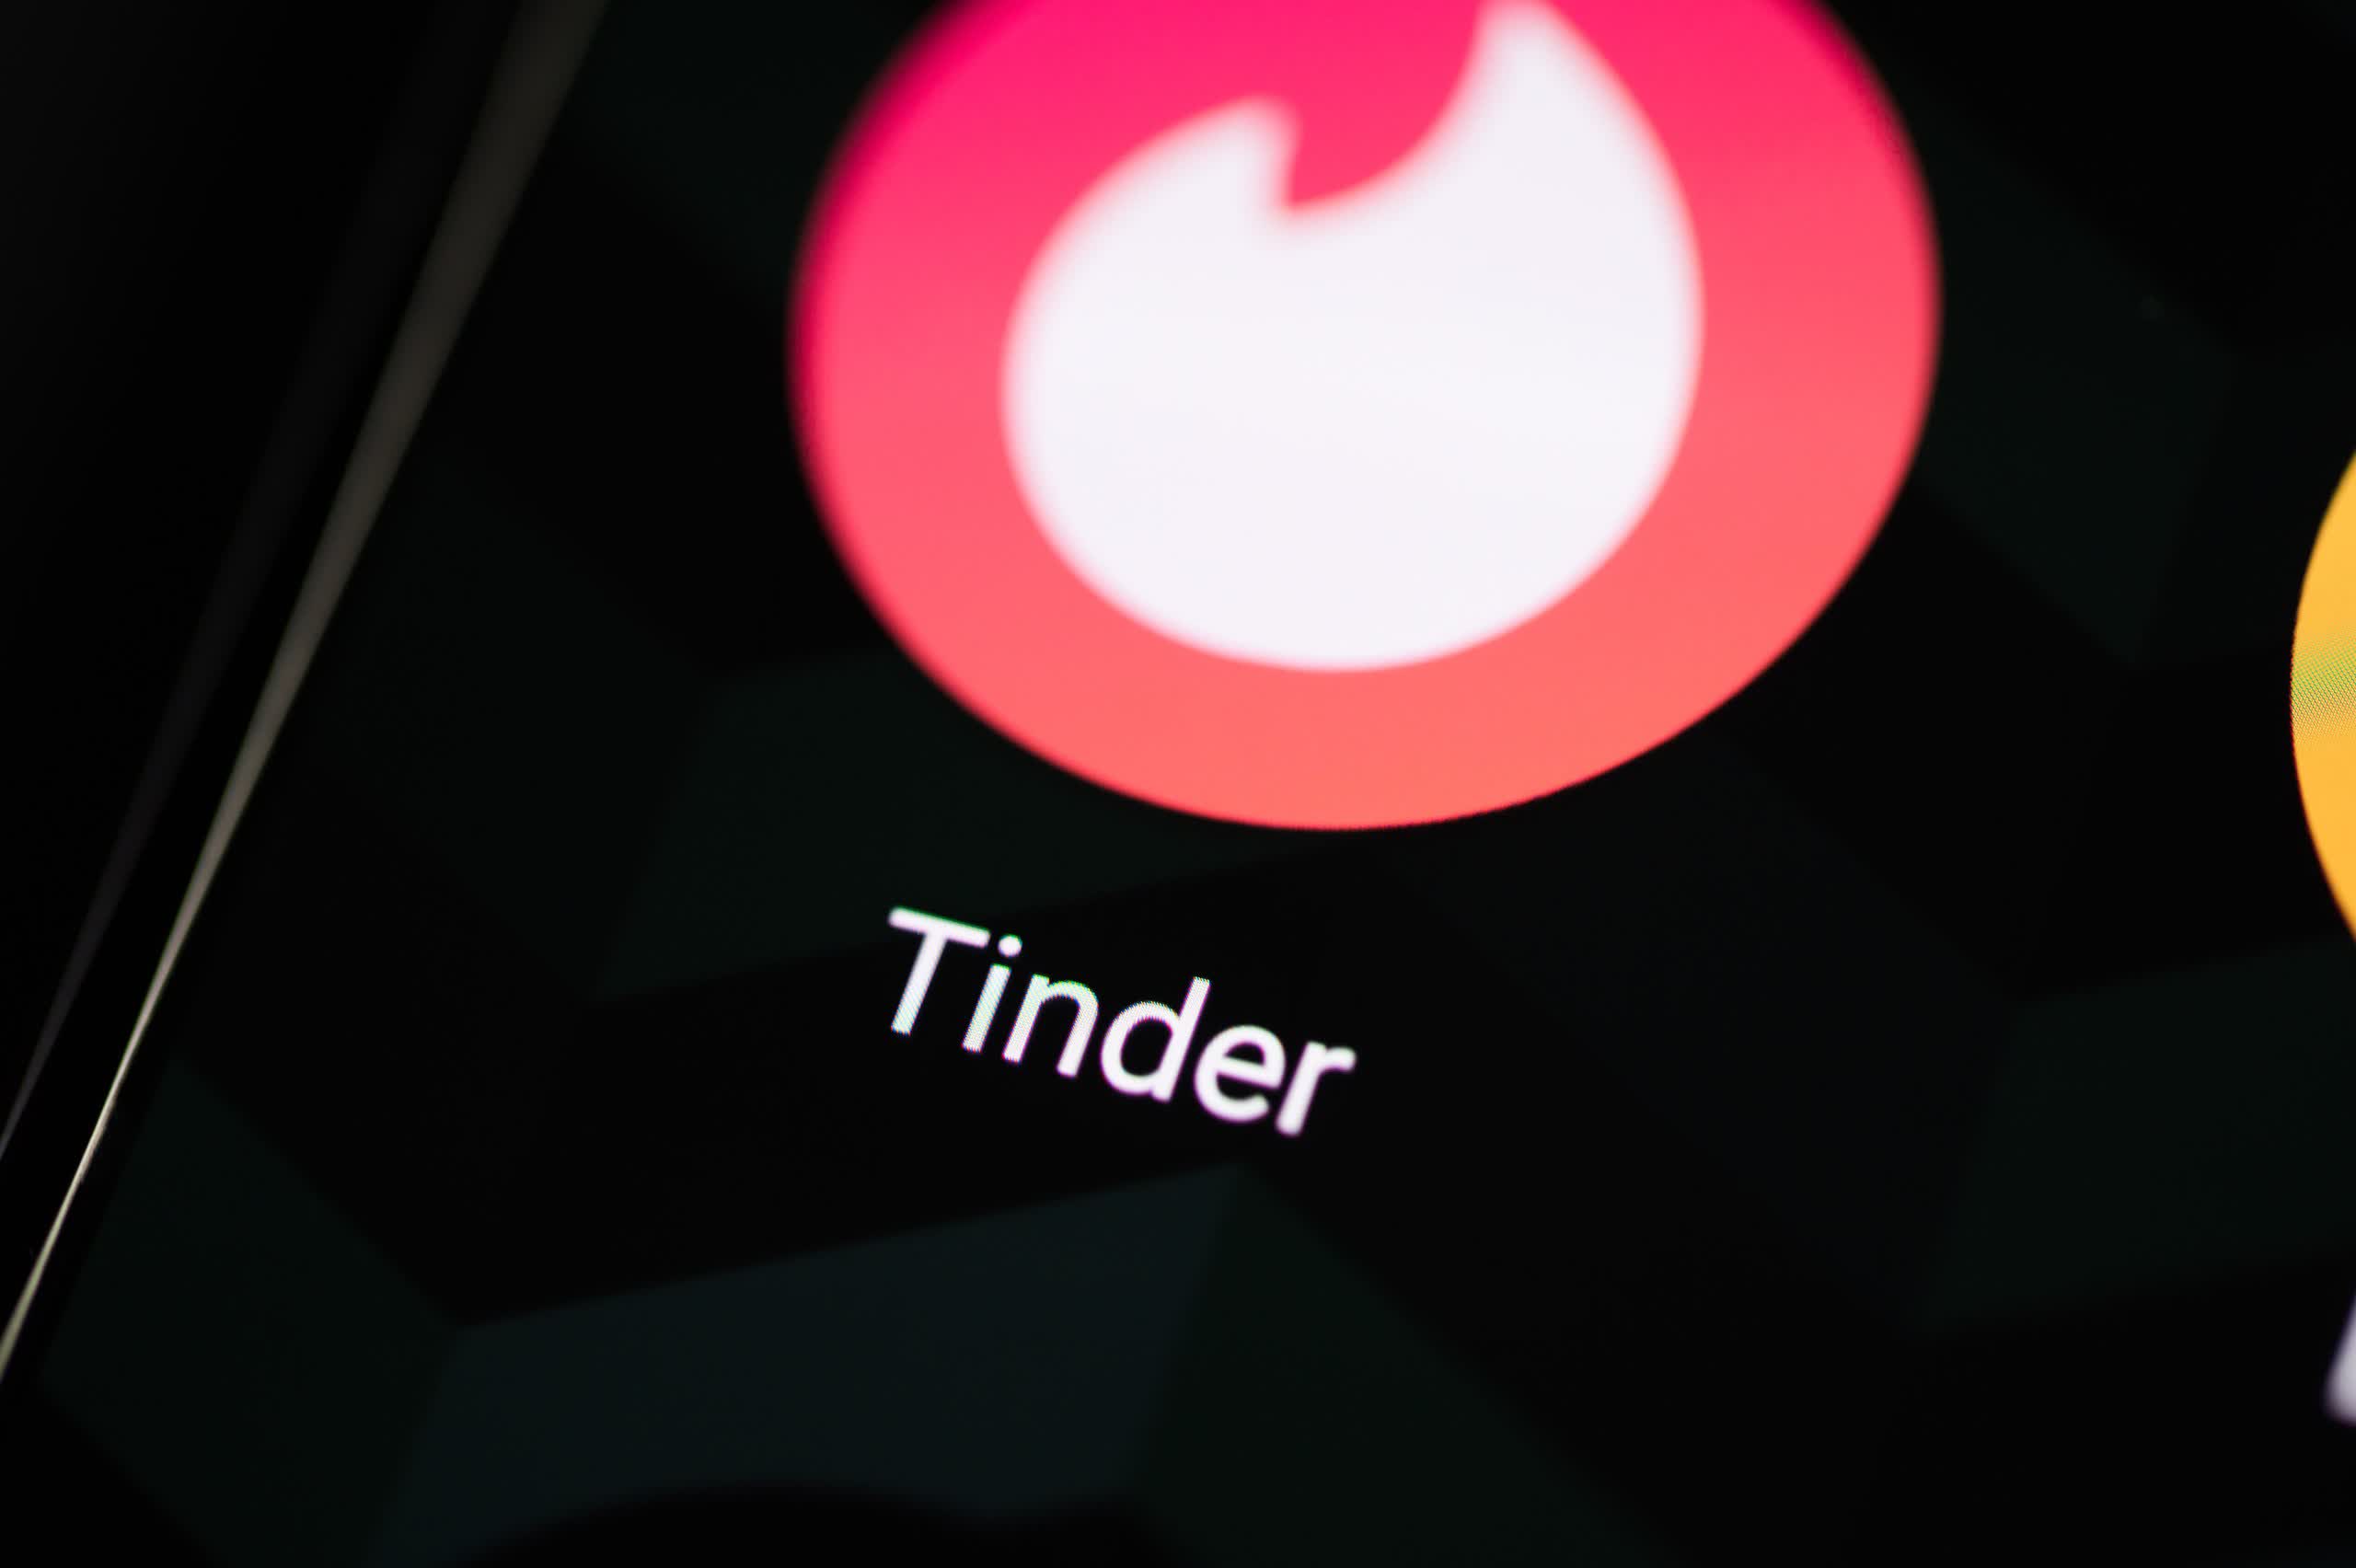 Tinder owner leaves Epic Games alone to battle Google's app store policies